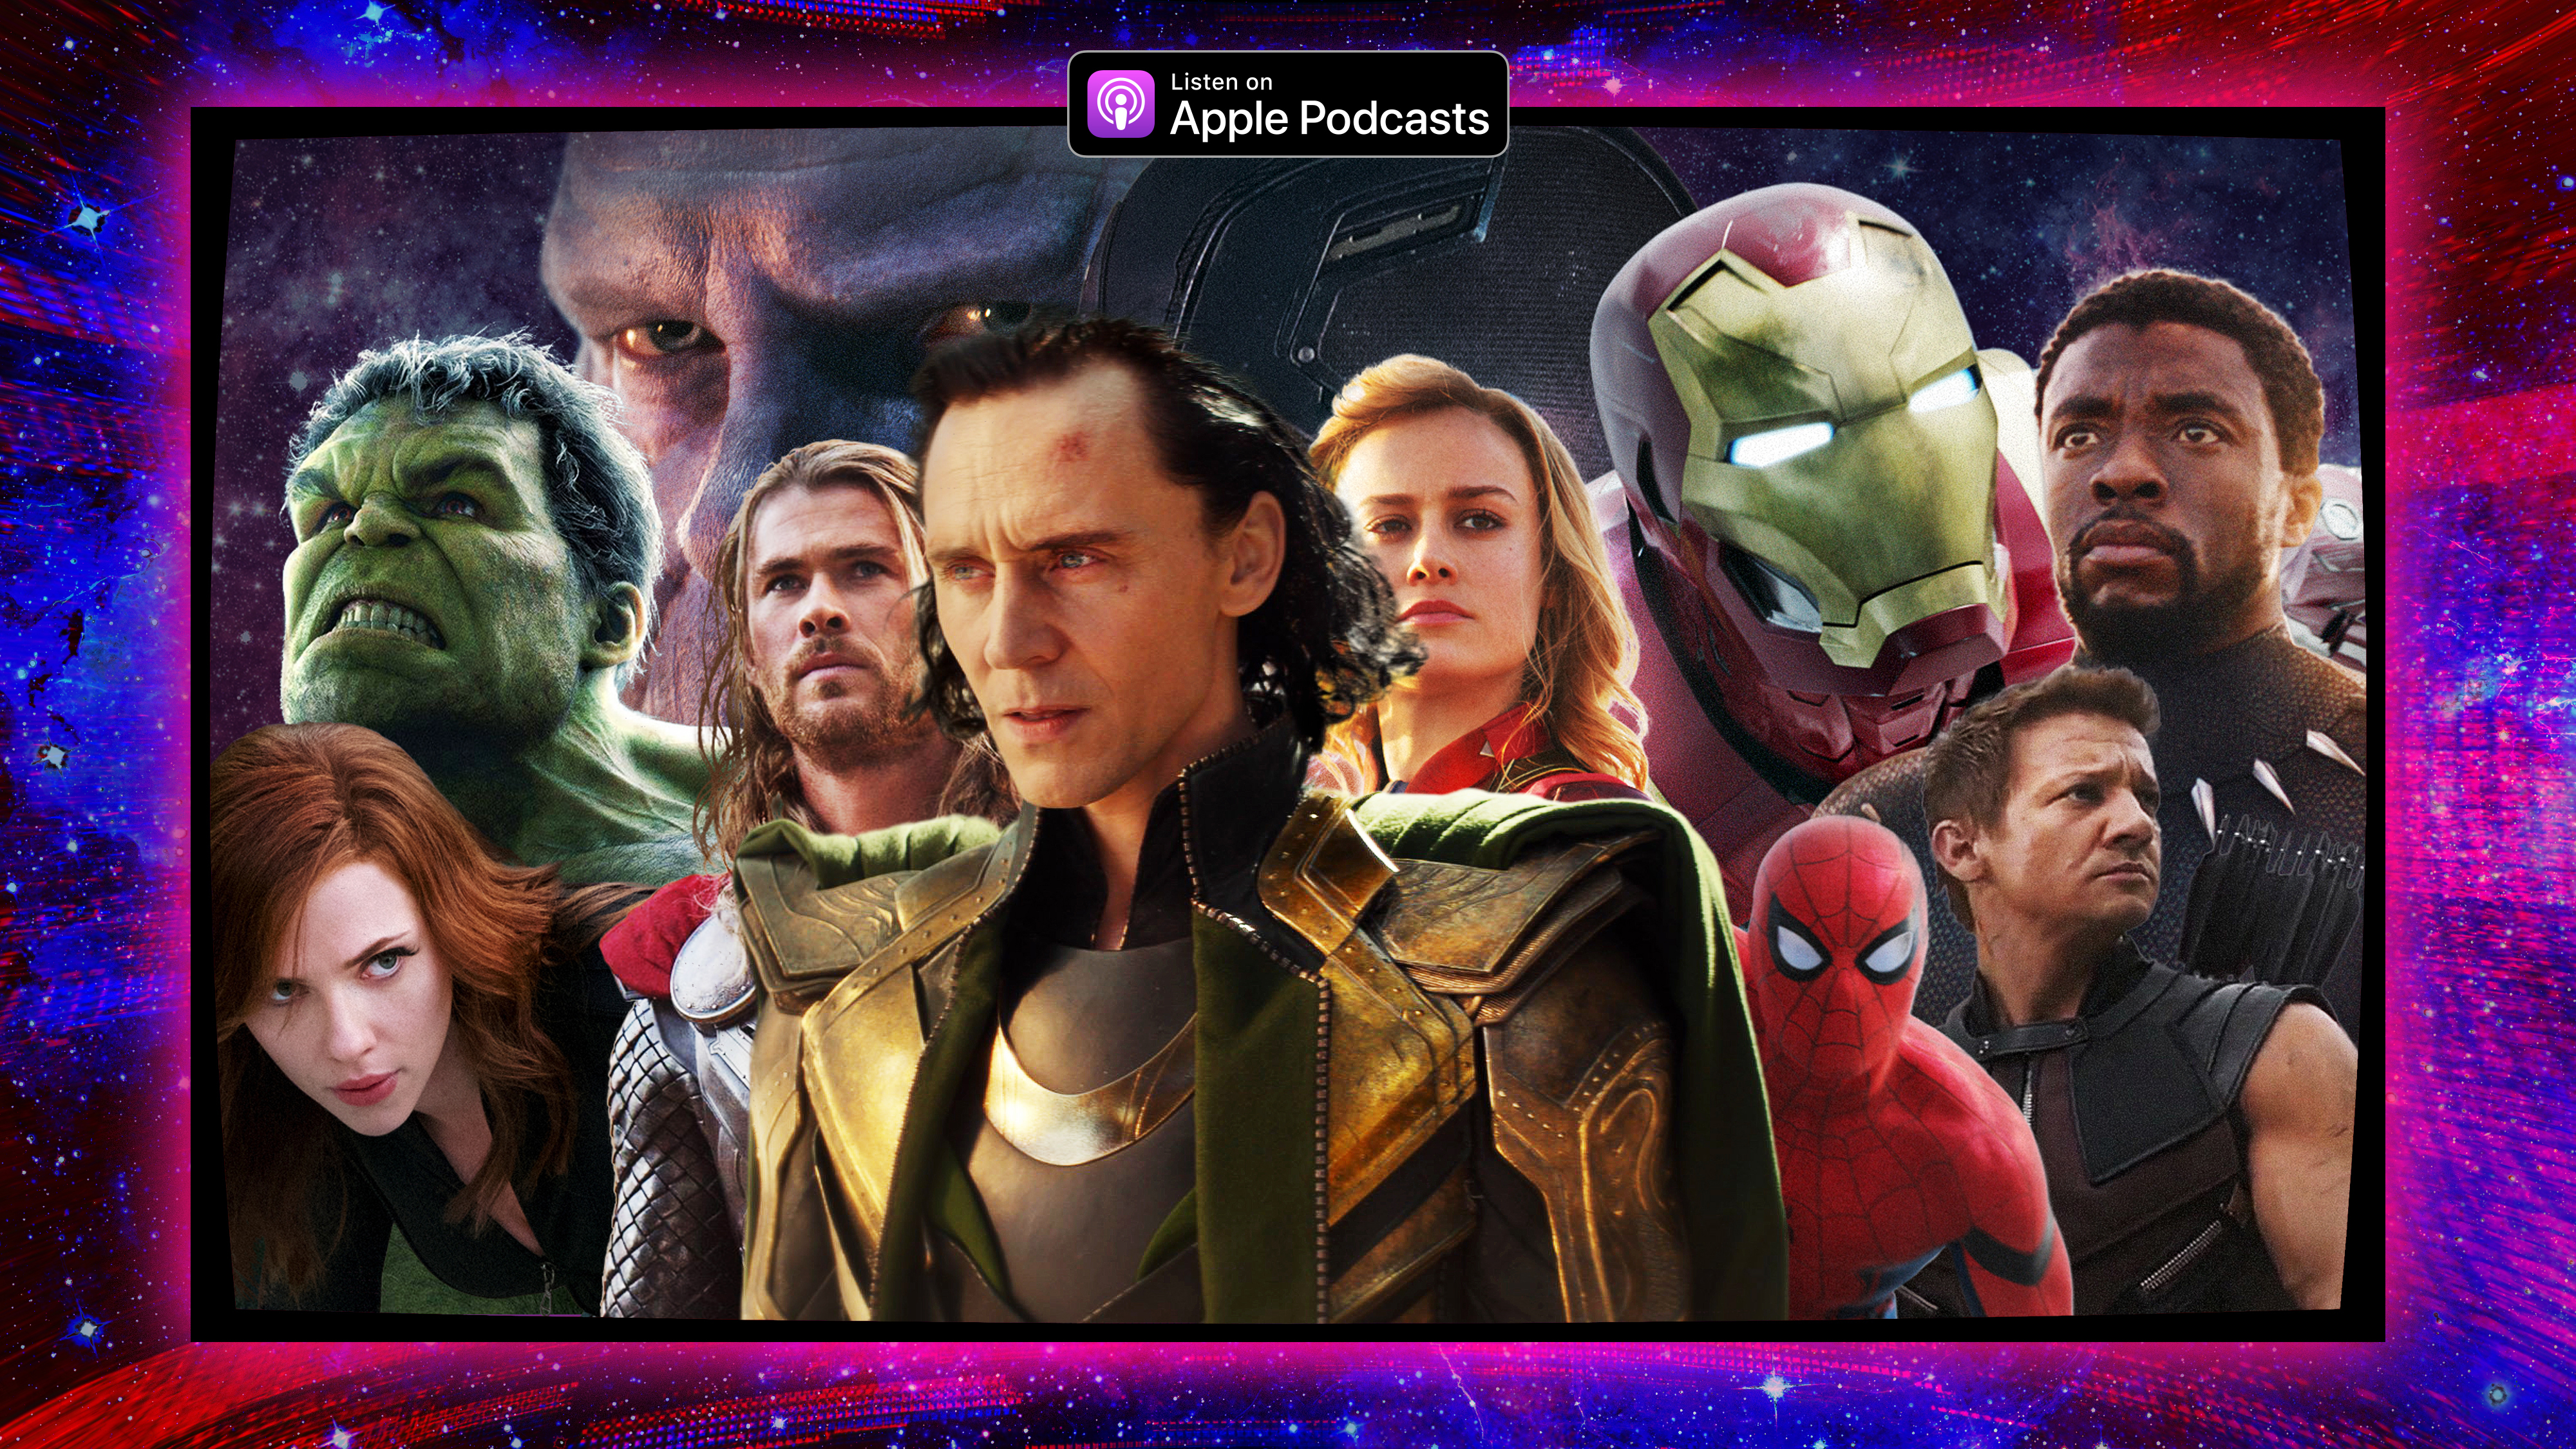 Illustration featuring the Avengers characters with Loki in the center